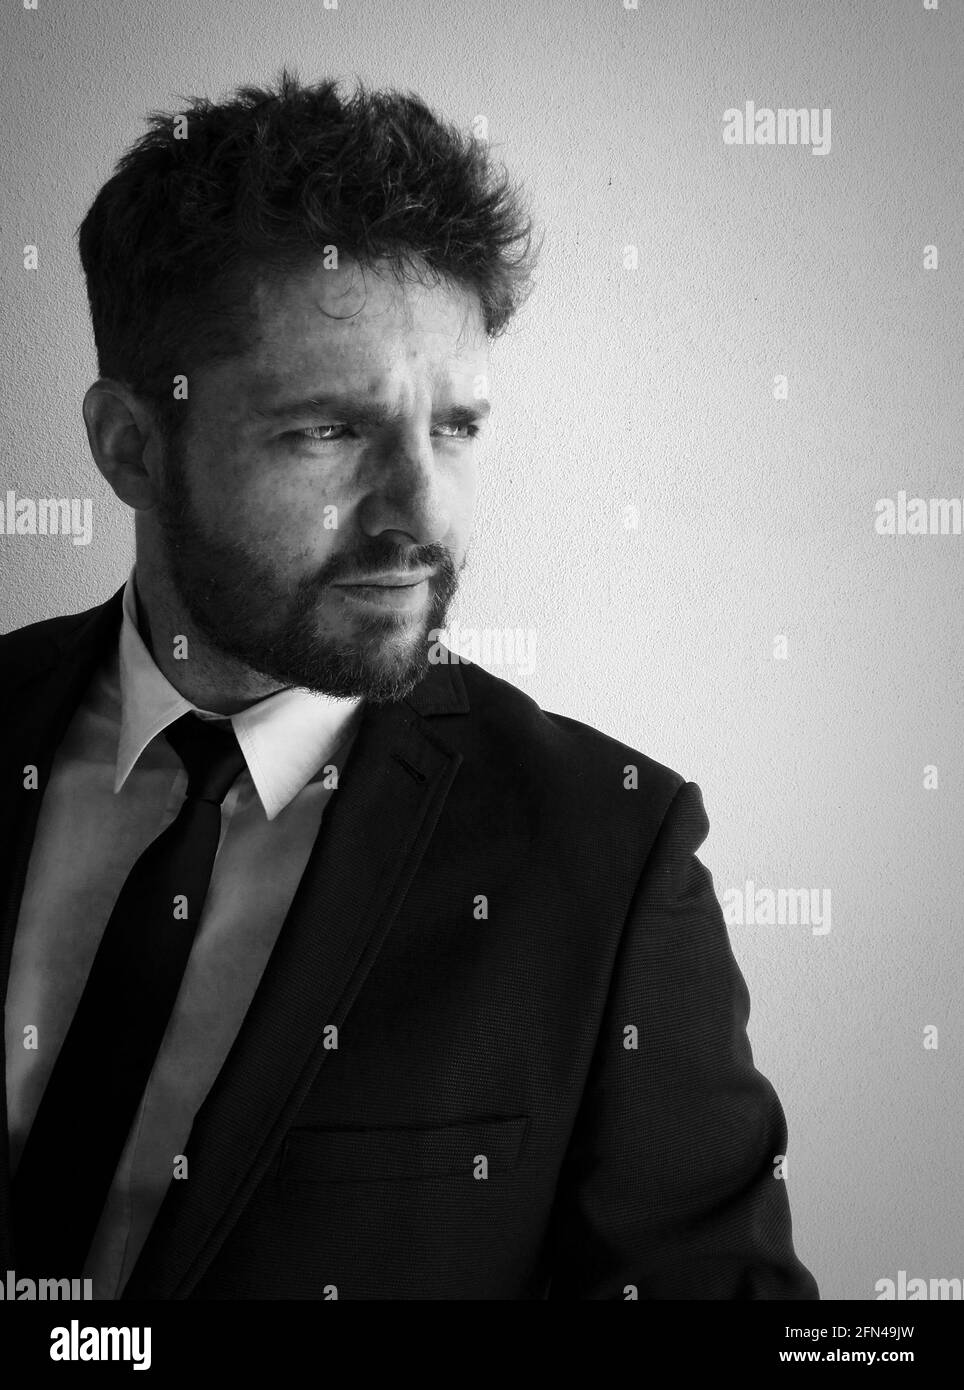 Black and white portrait of elegant man with beard. Man with clear eyes and gloomy look in a suit and tie. Stock Photo